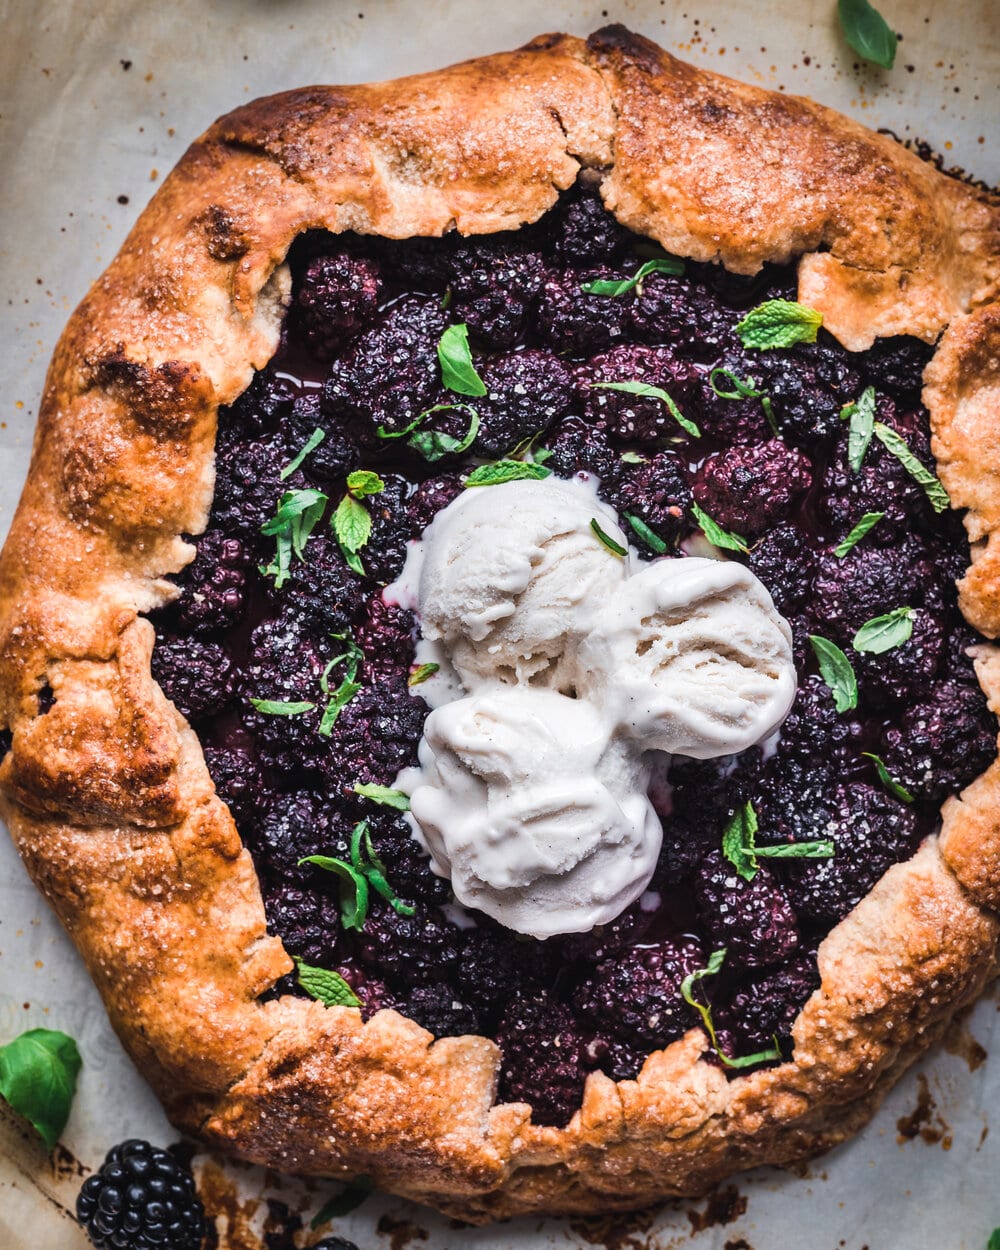 Blackberry galette with herbs and ice cream.